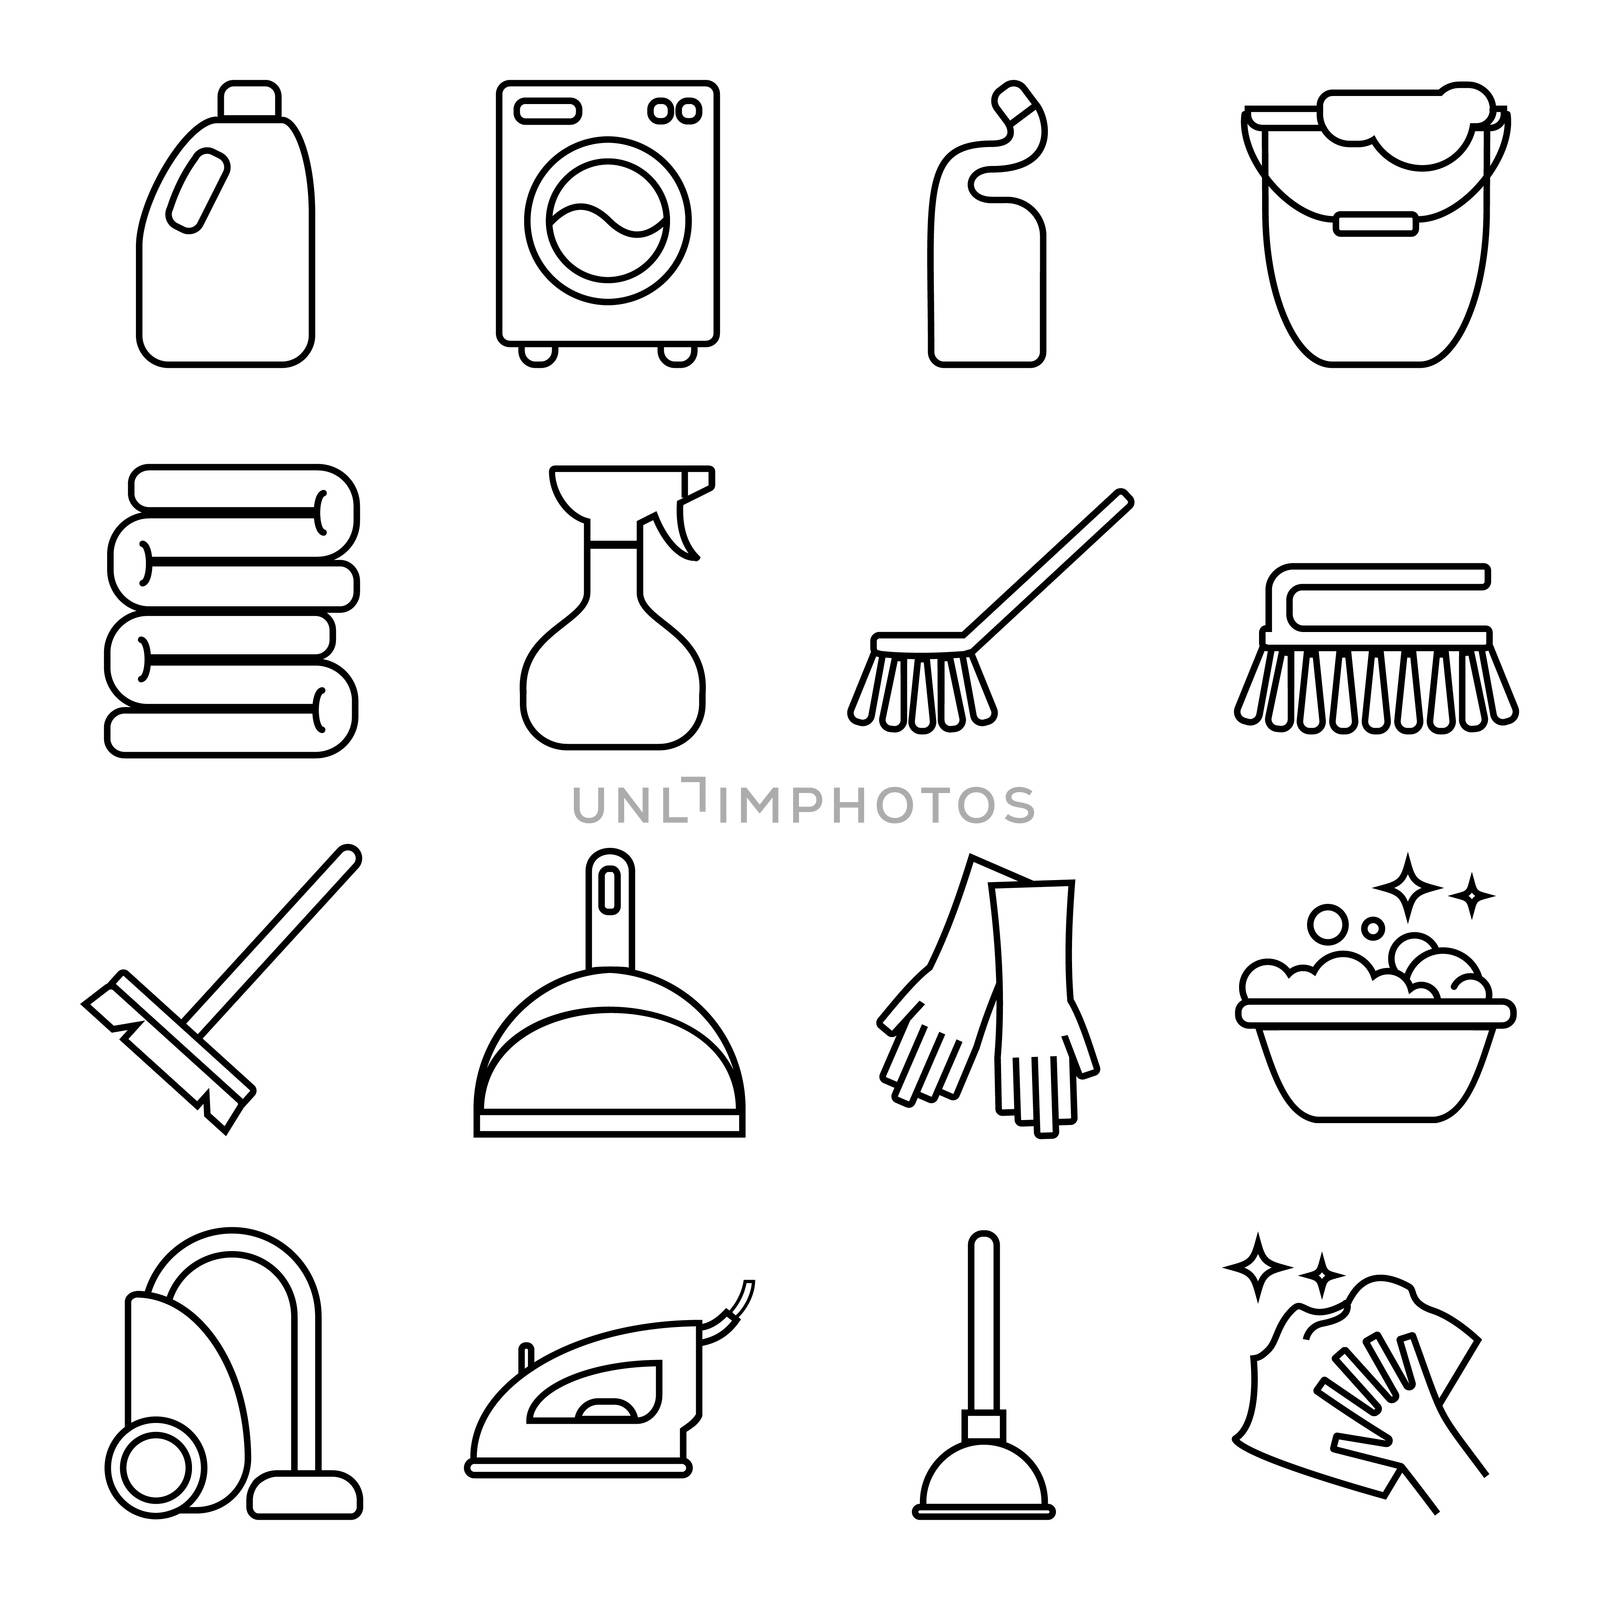  set of isolated cleaning icon. elements associated with cleaning for your design project.